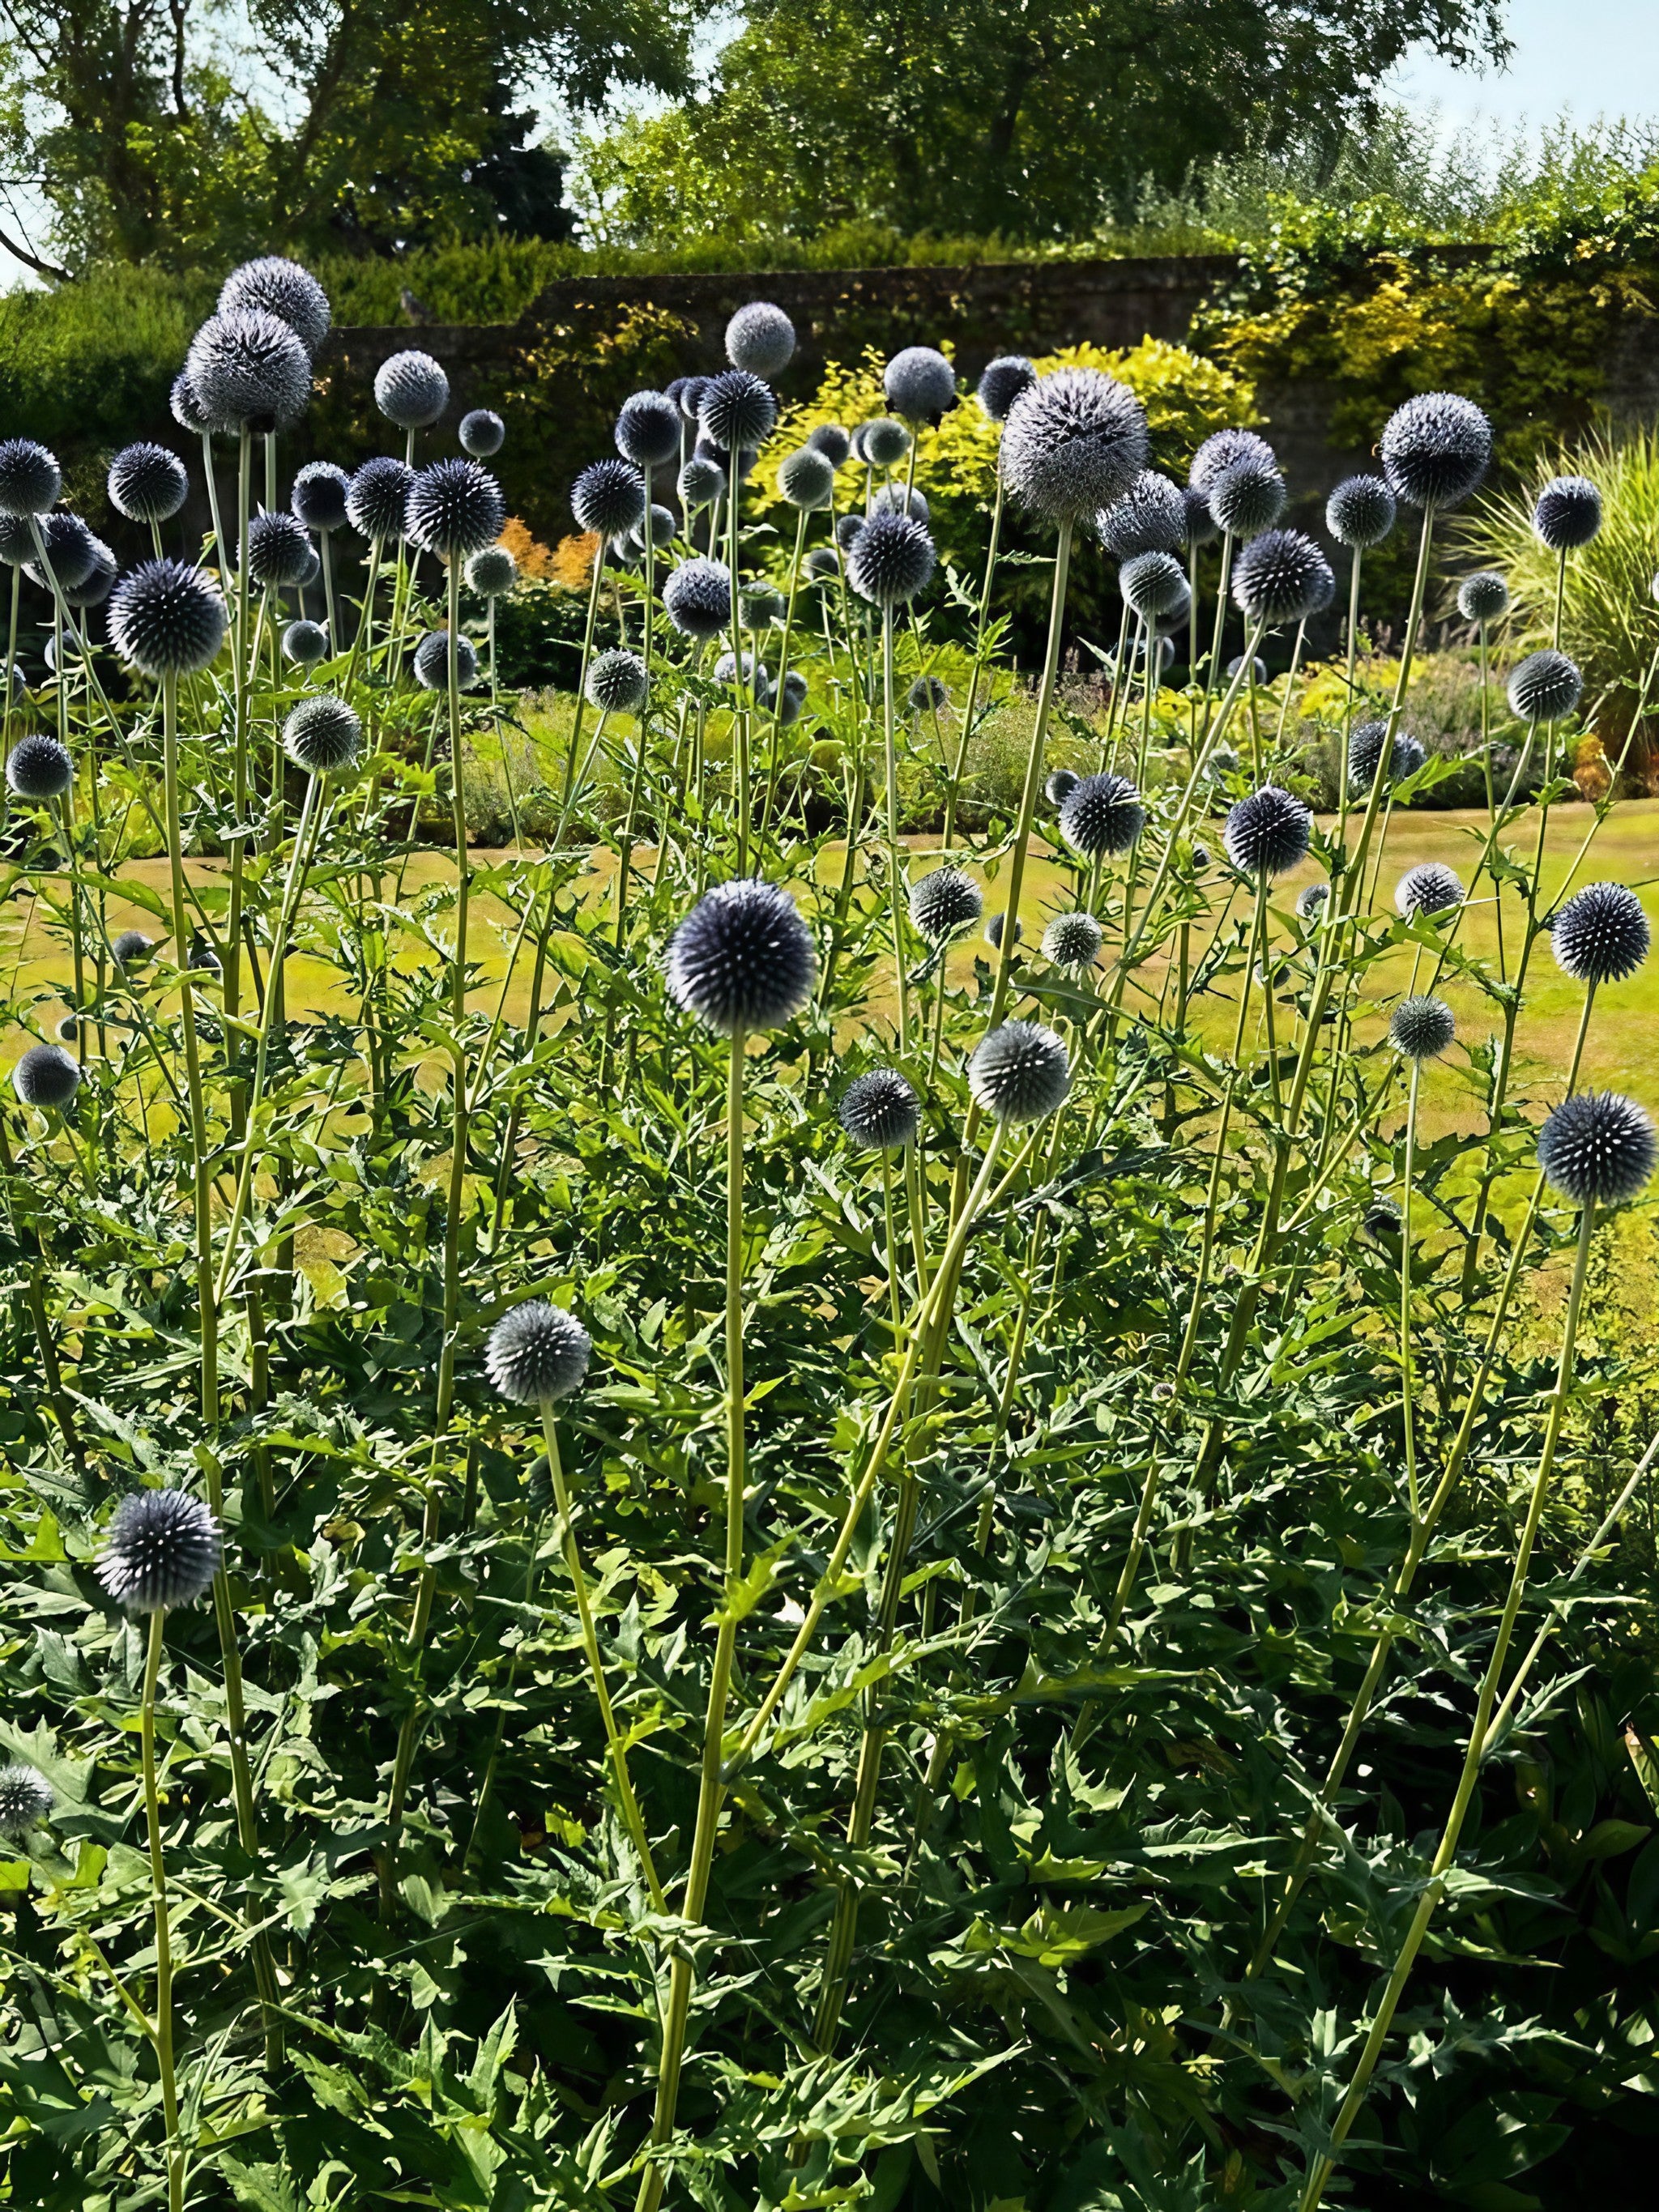 Expansive cultivation of Echinops ritro Metallic Blue in a garden setting